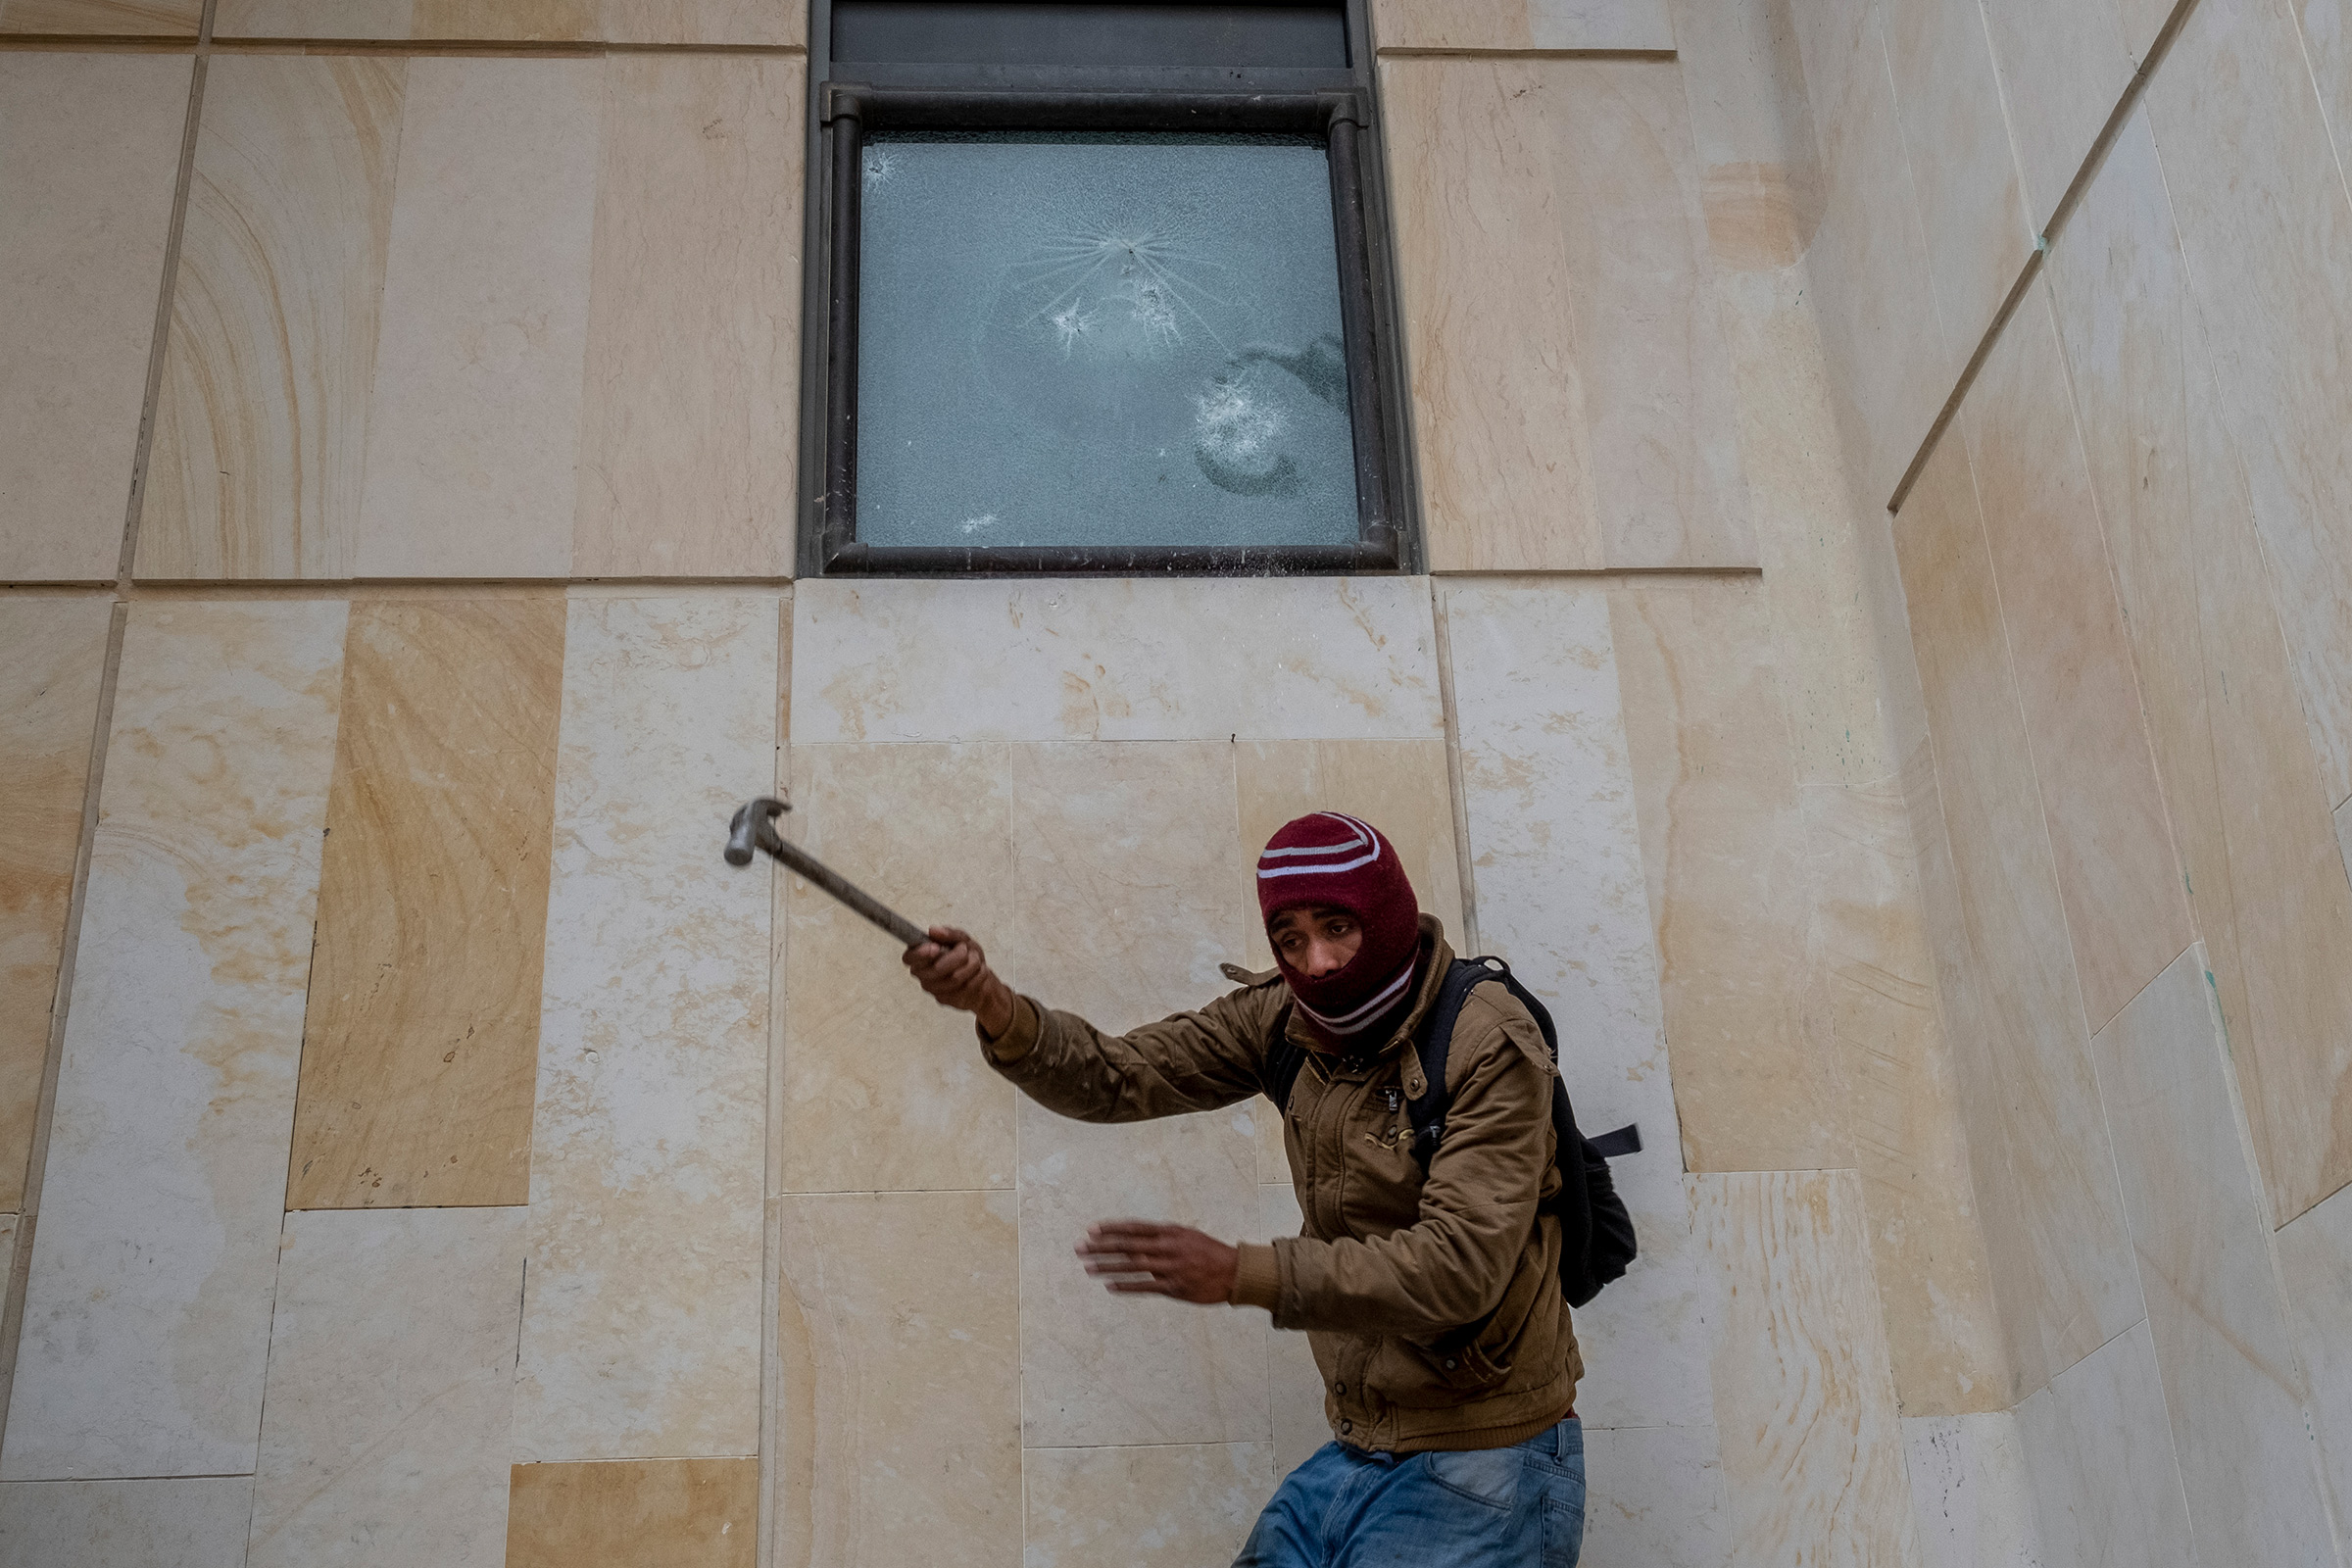 A protestor breaks a window at the Supreme Court Of Justice in downtown Bogotá on April 28. (Santiago Mesa—Reojo Colectivo)